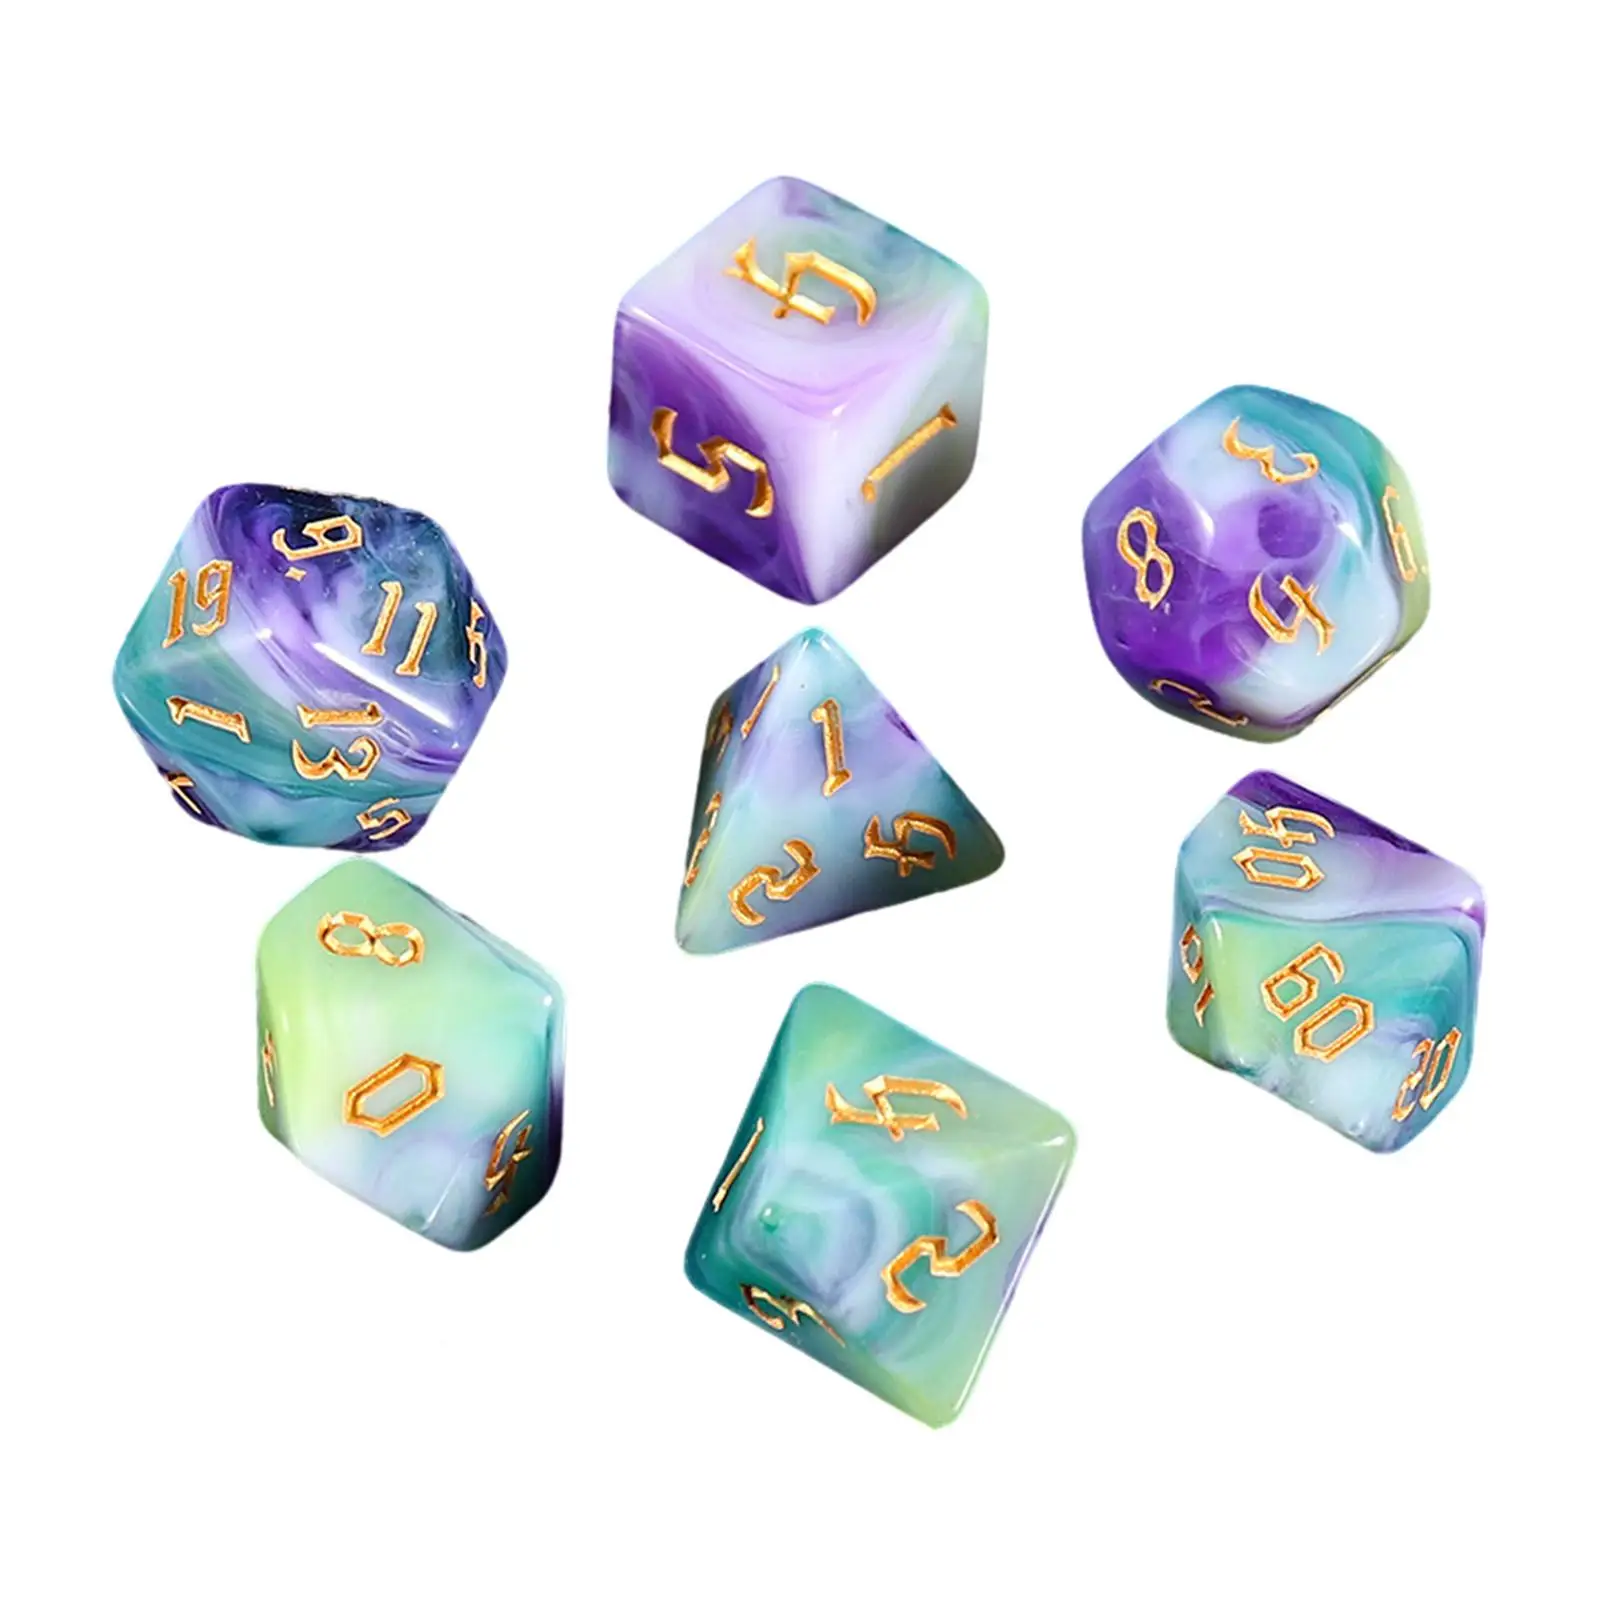 7 Pieces D4 D8 D10 D12 D20 Dices Bar Toys Board Game Acrylic Dices Polyhedral Dices Set for Card Games Math Teaching RPG